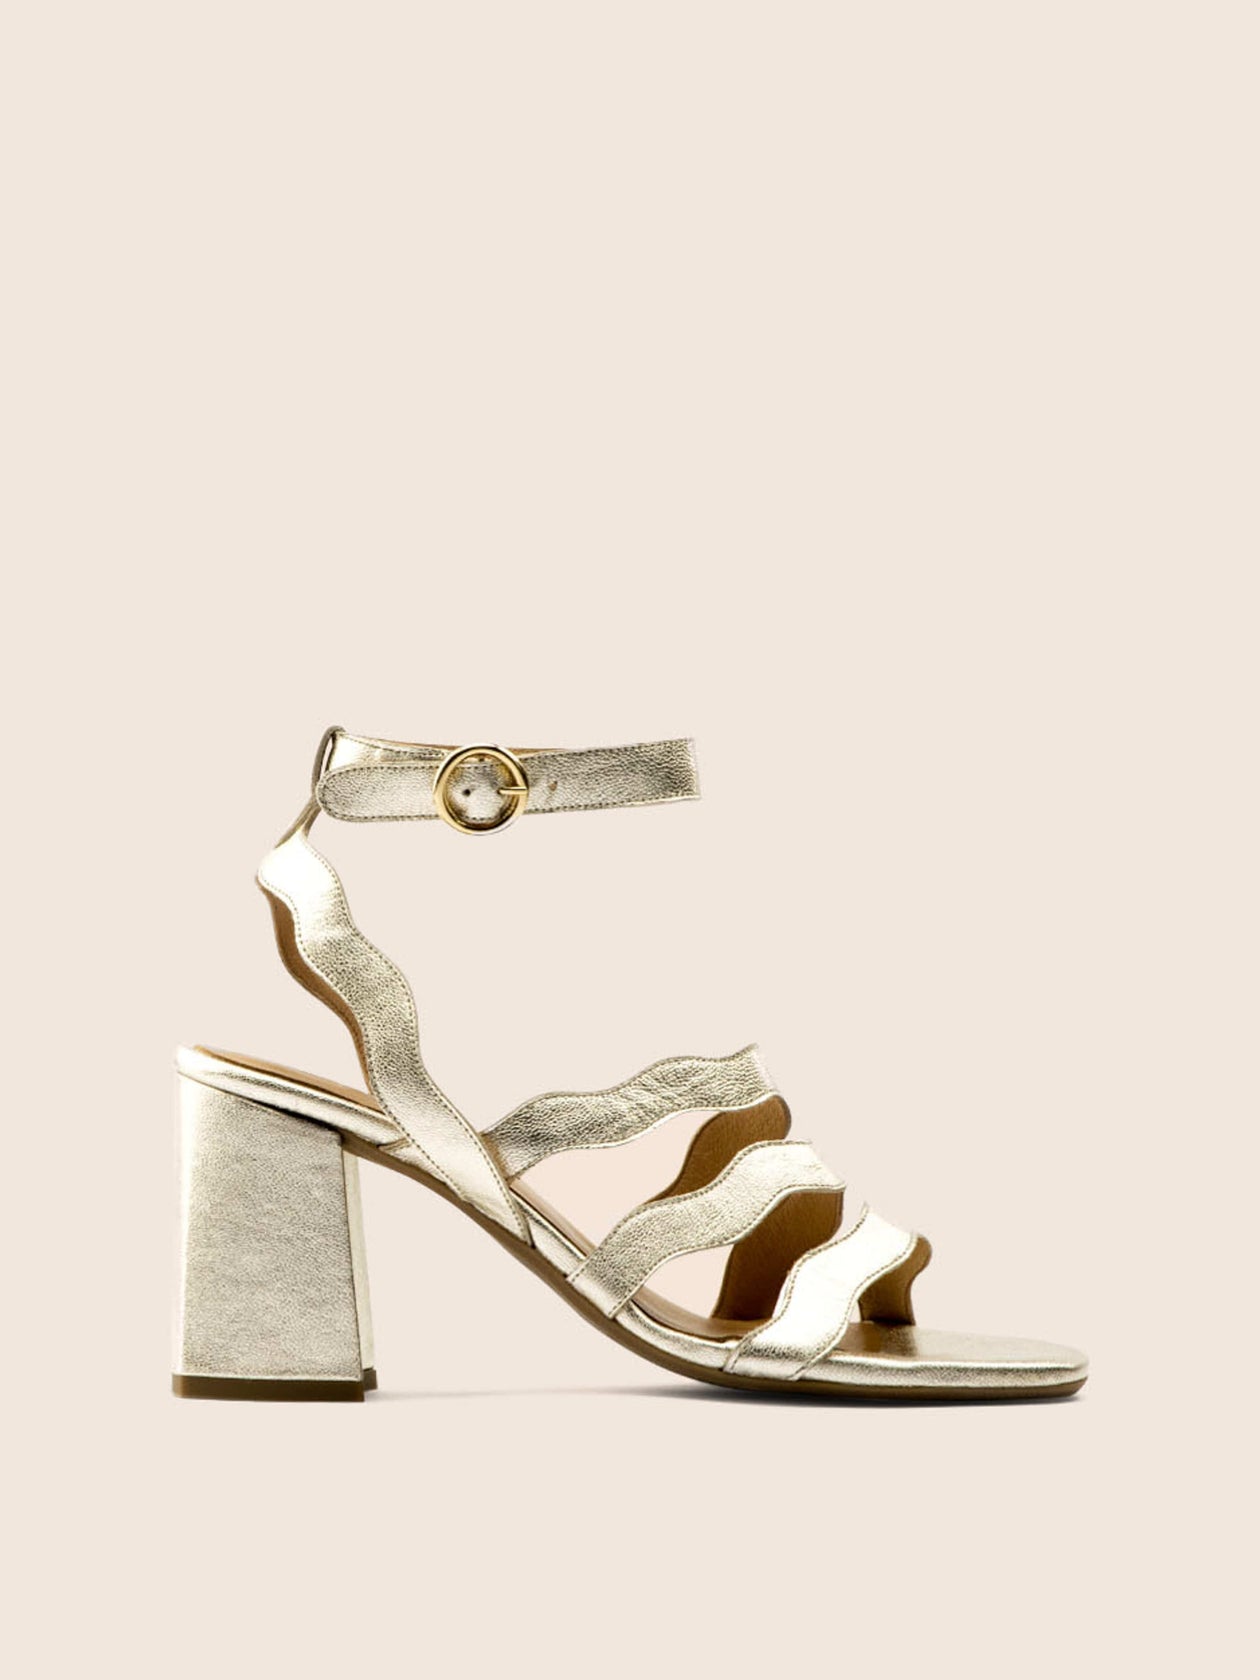 Maguire Rimini Leather Wavy High Heels - Gold